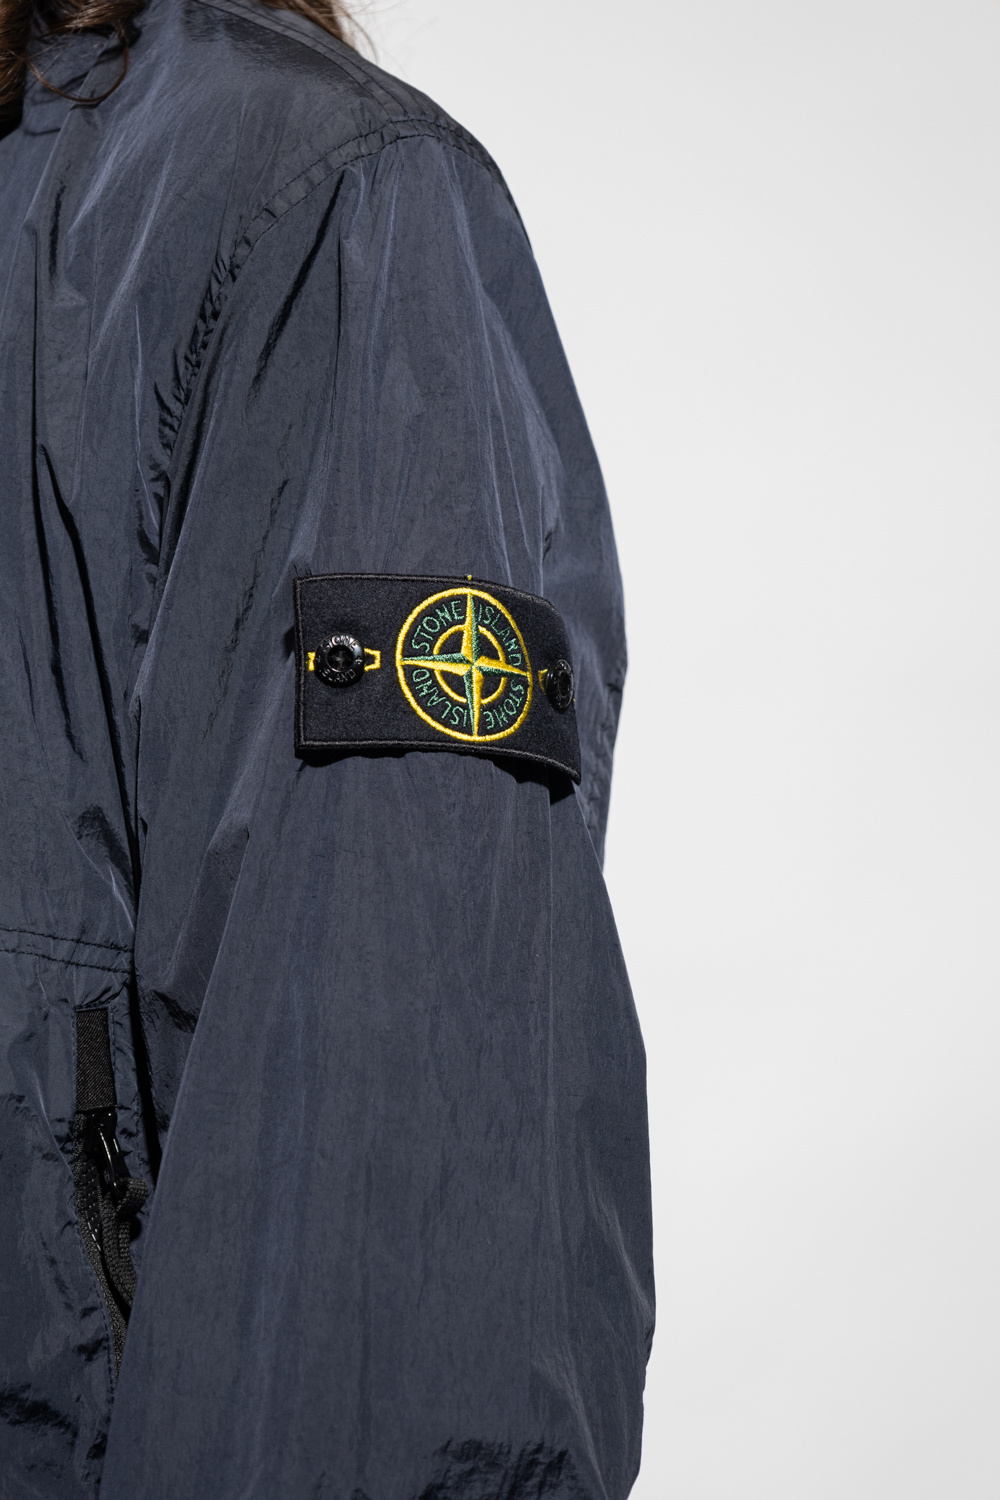 Stone Island Lovely shirt but comes